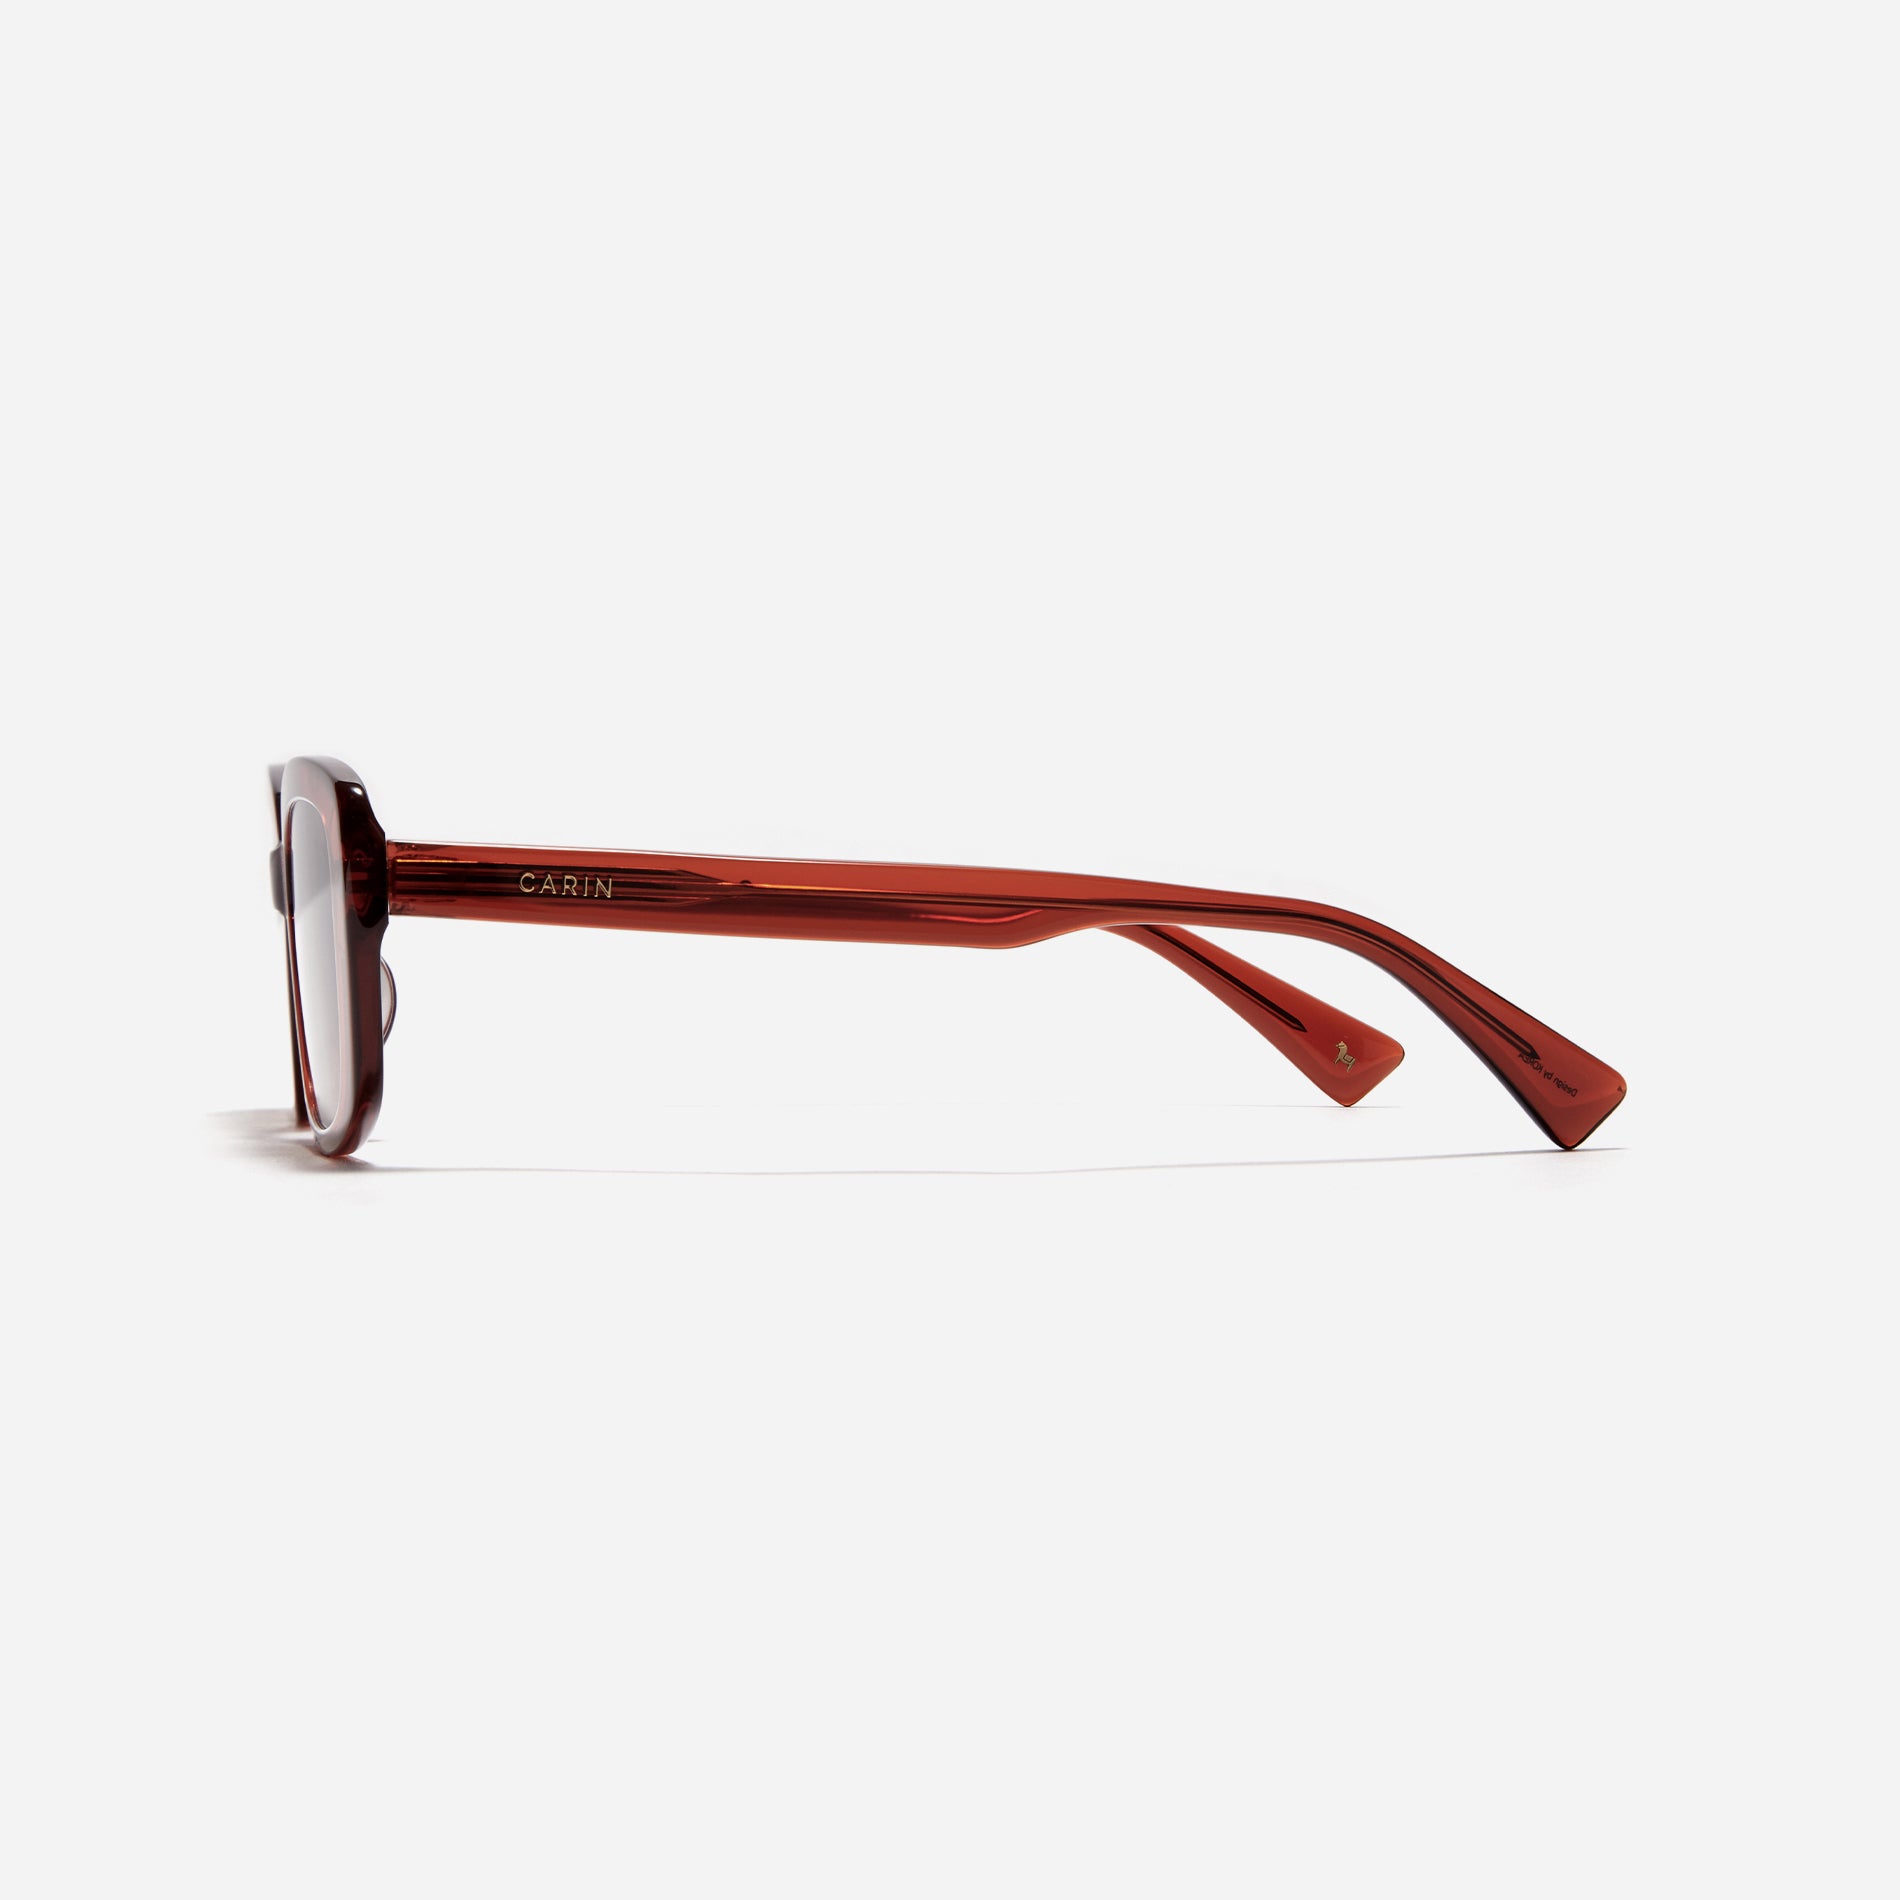 Square-shaped petite frame sunglasses. Crafted entirely from acetate material, these glasses offer robust durability that resists breakage. Cara features a unisex design that reinterprets the '80s retro style with a modern touch.